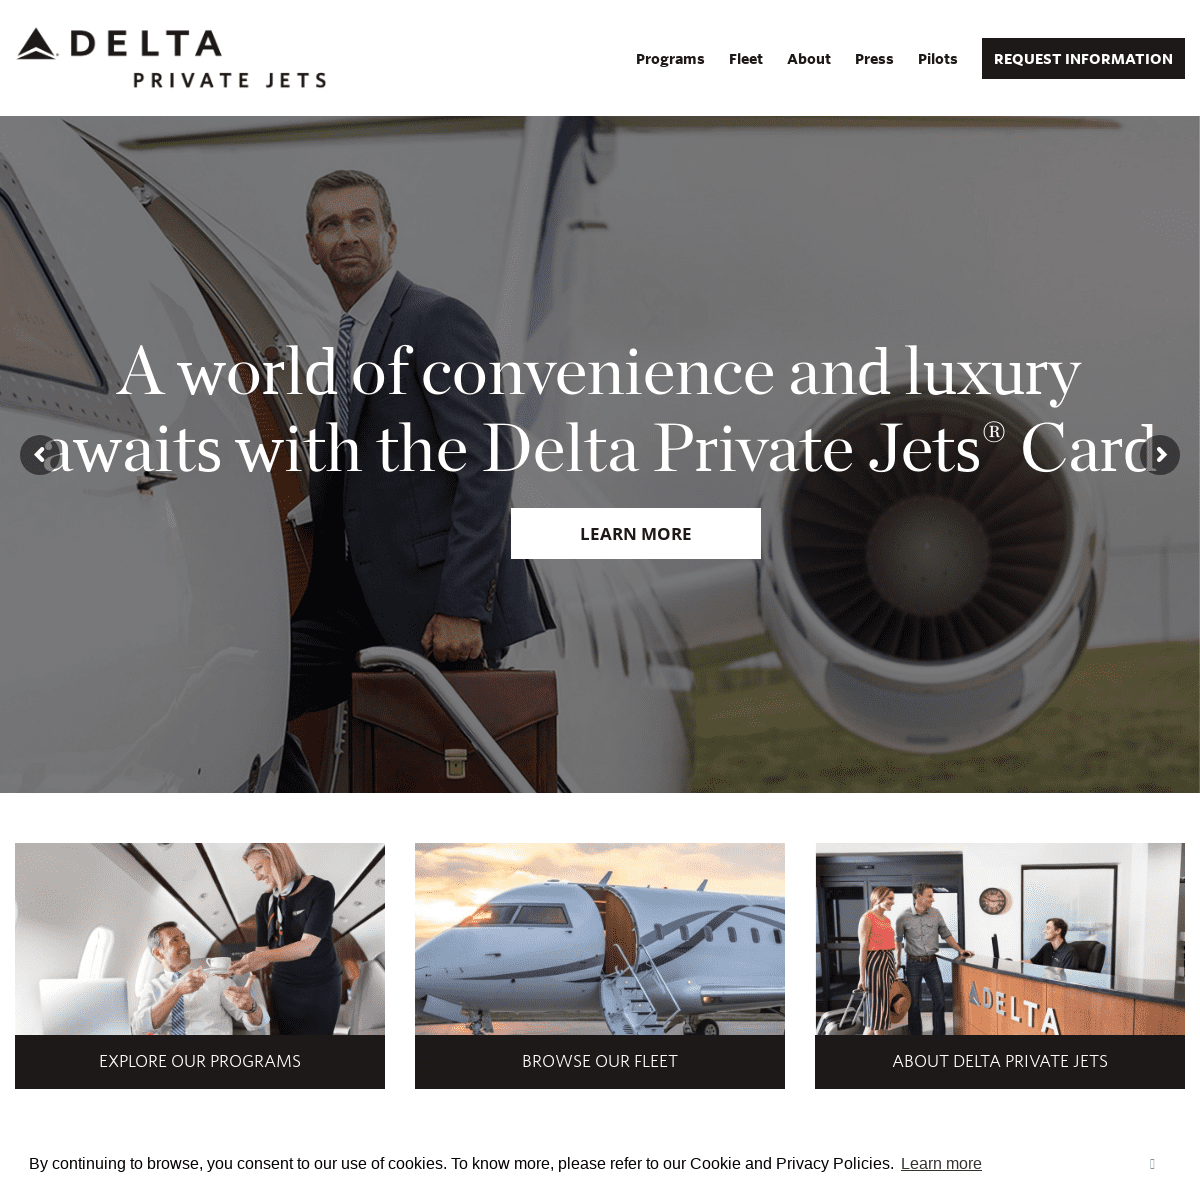 Delta Private Jets: Private Jet Charters, Member Programs & More